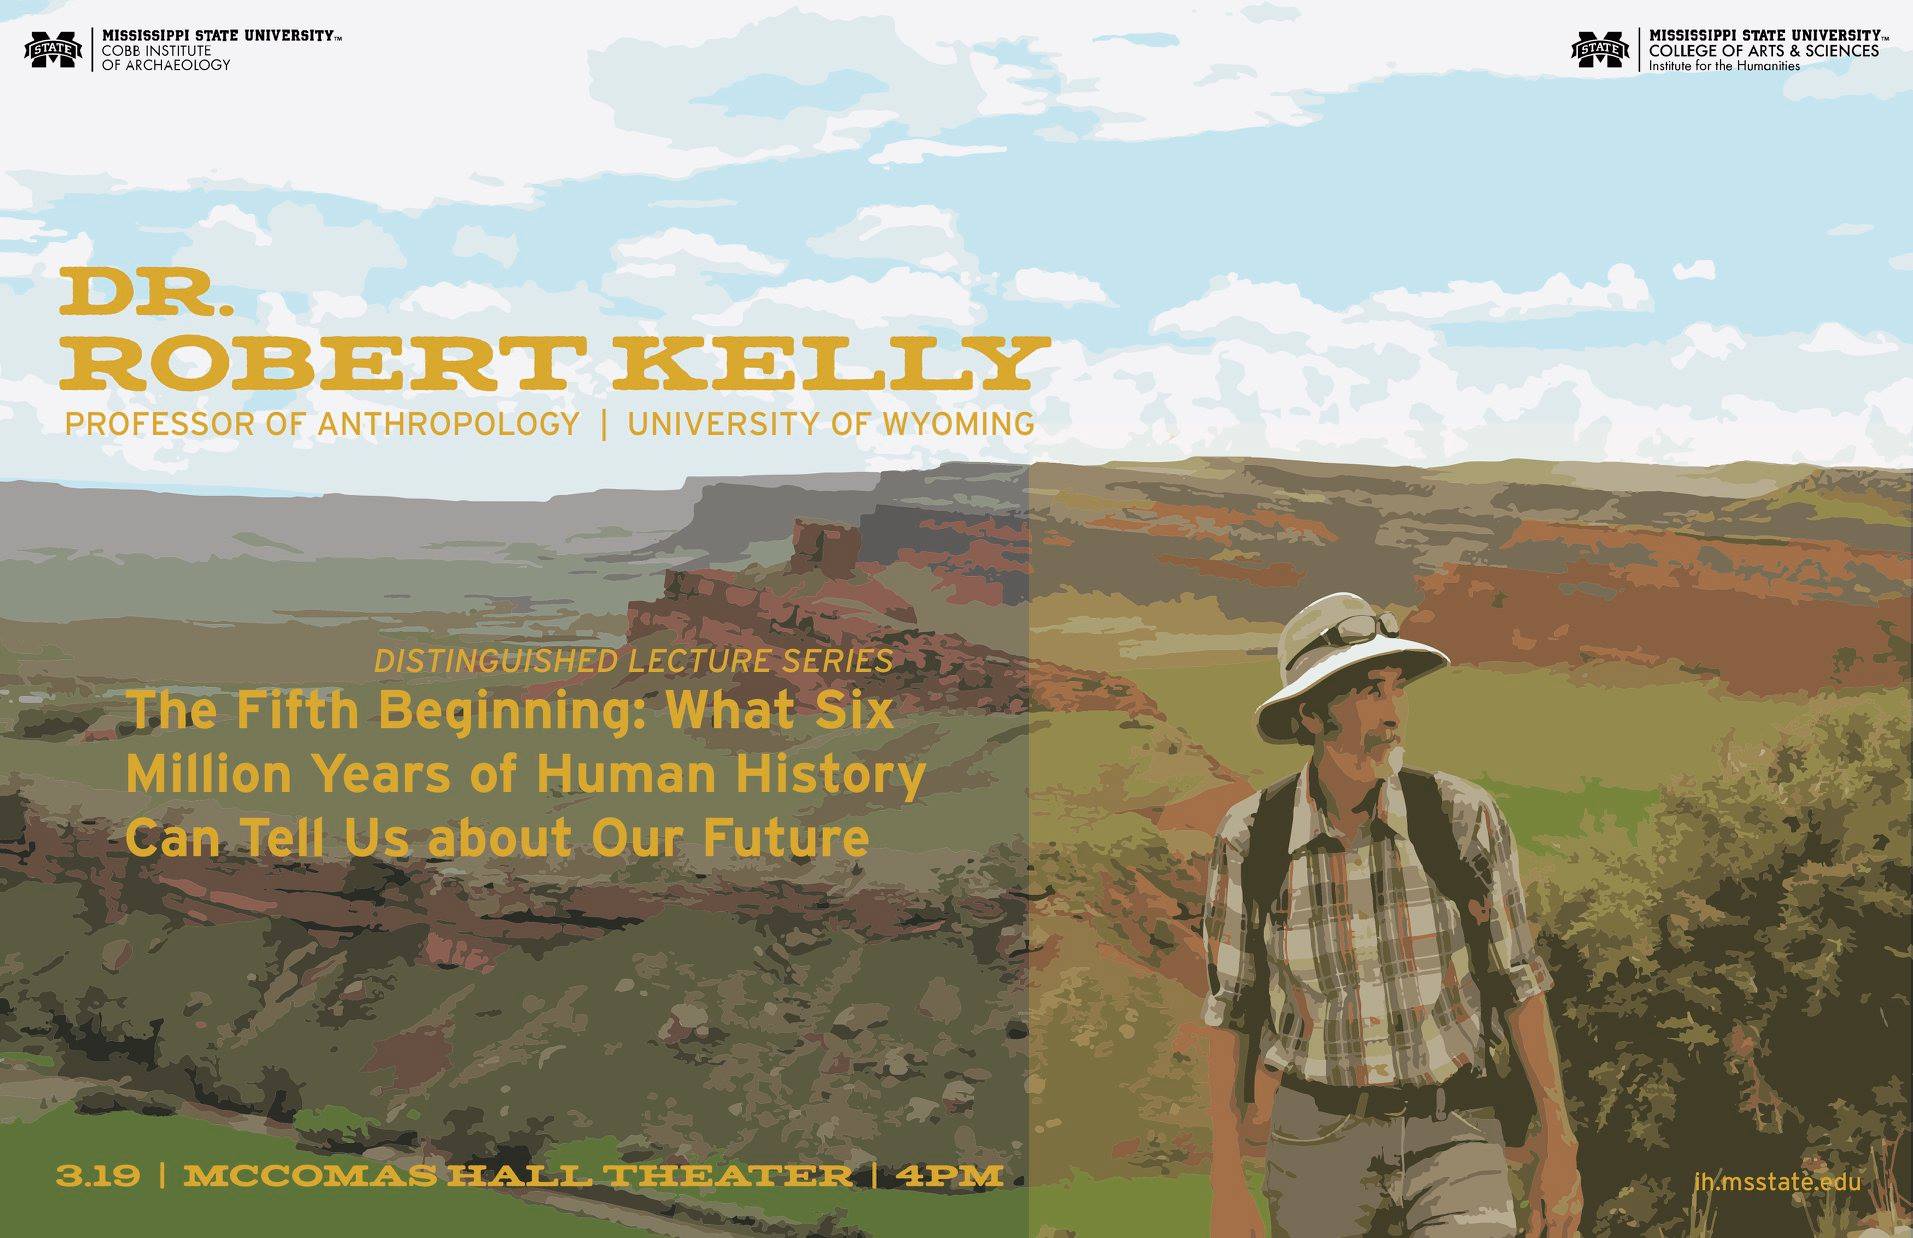 Dr. Robert Kelly Lecture Series Flyer